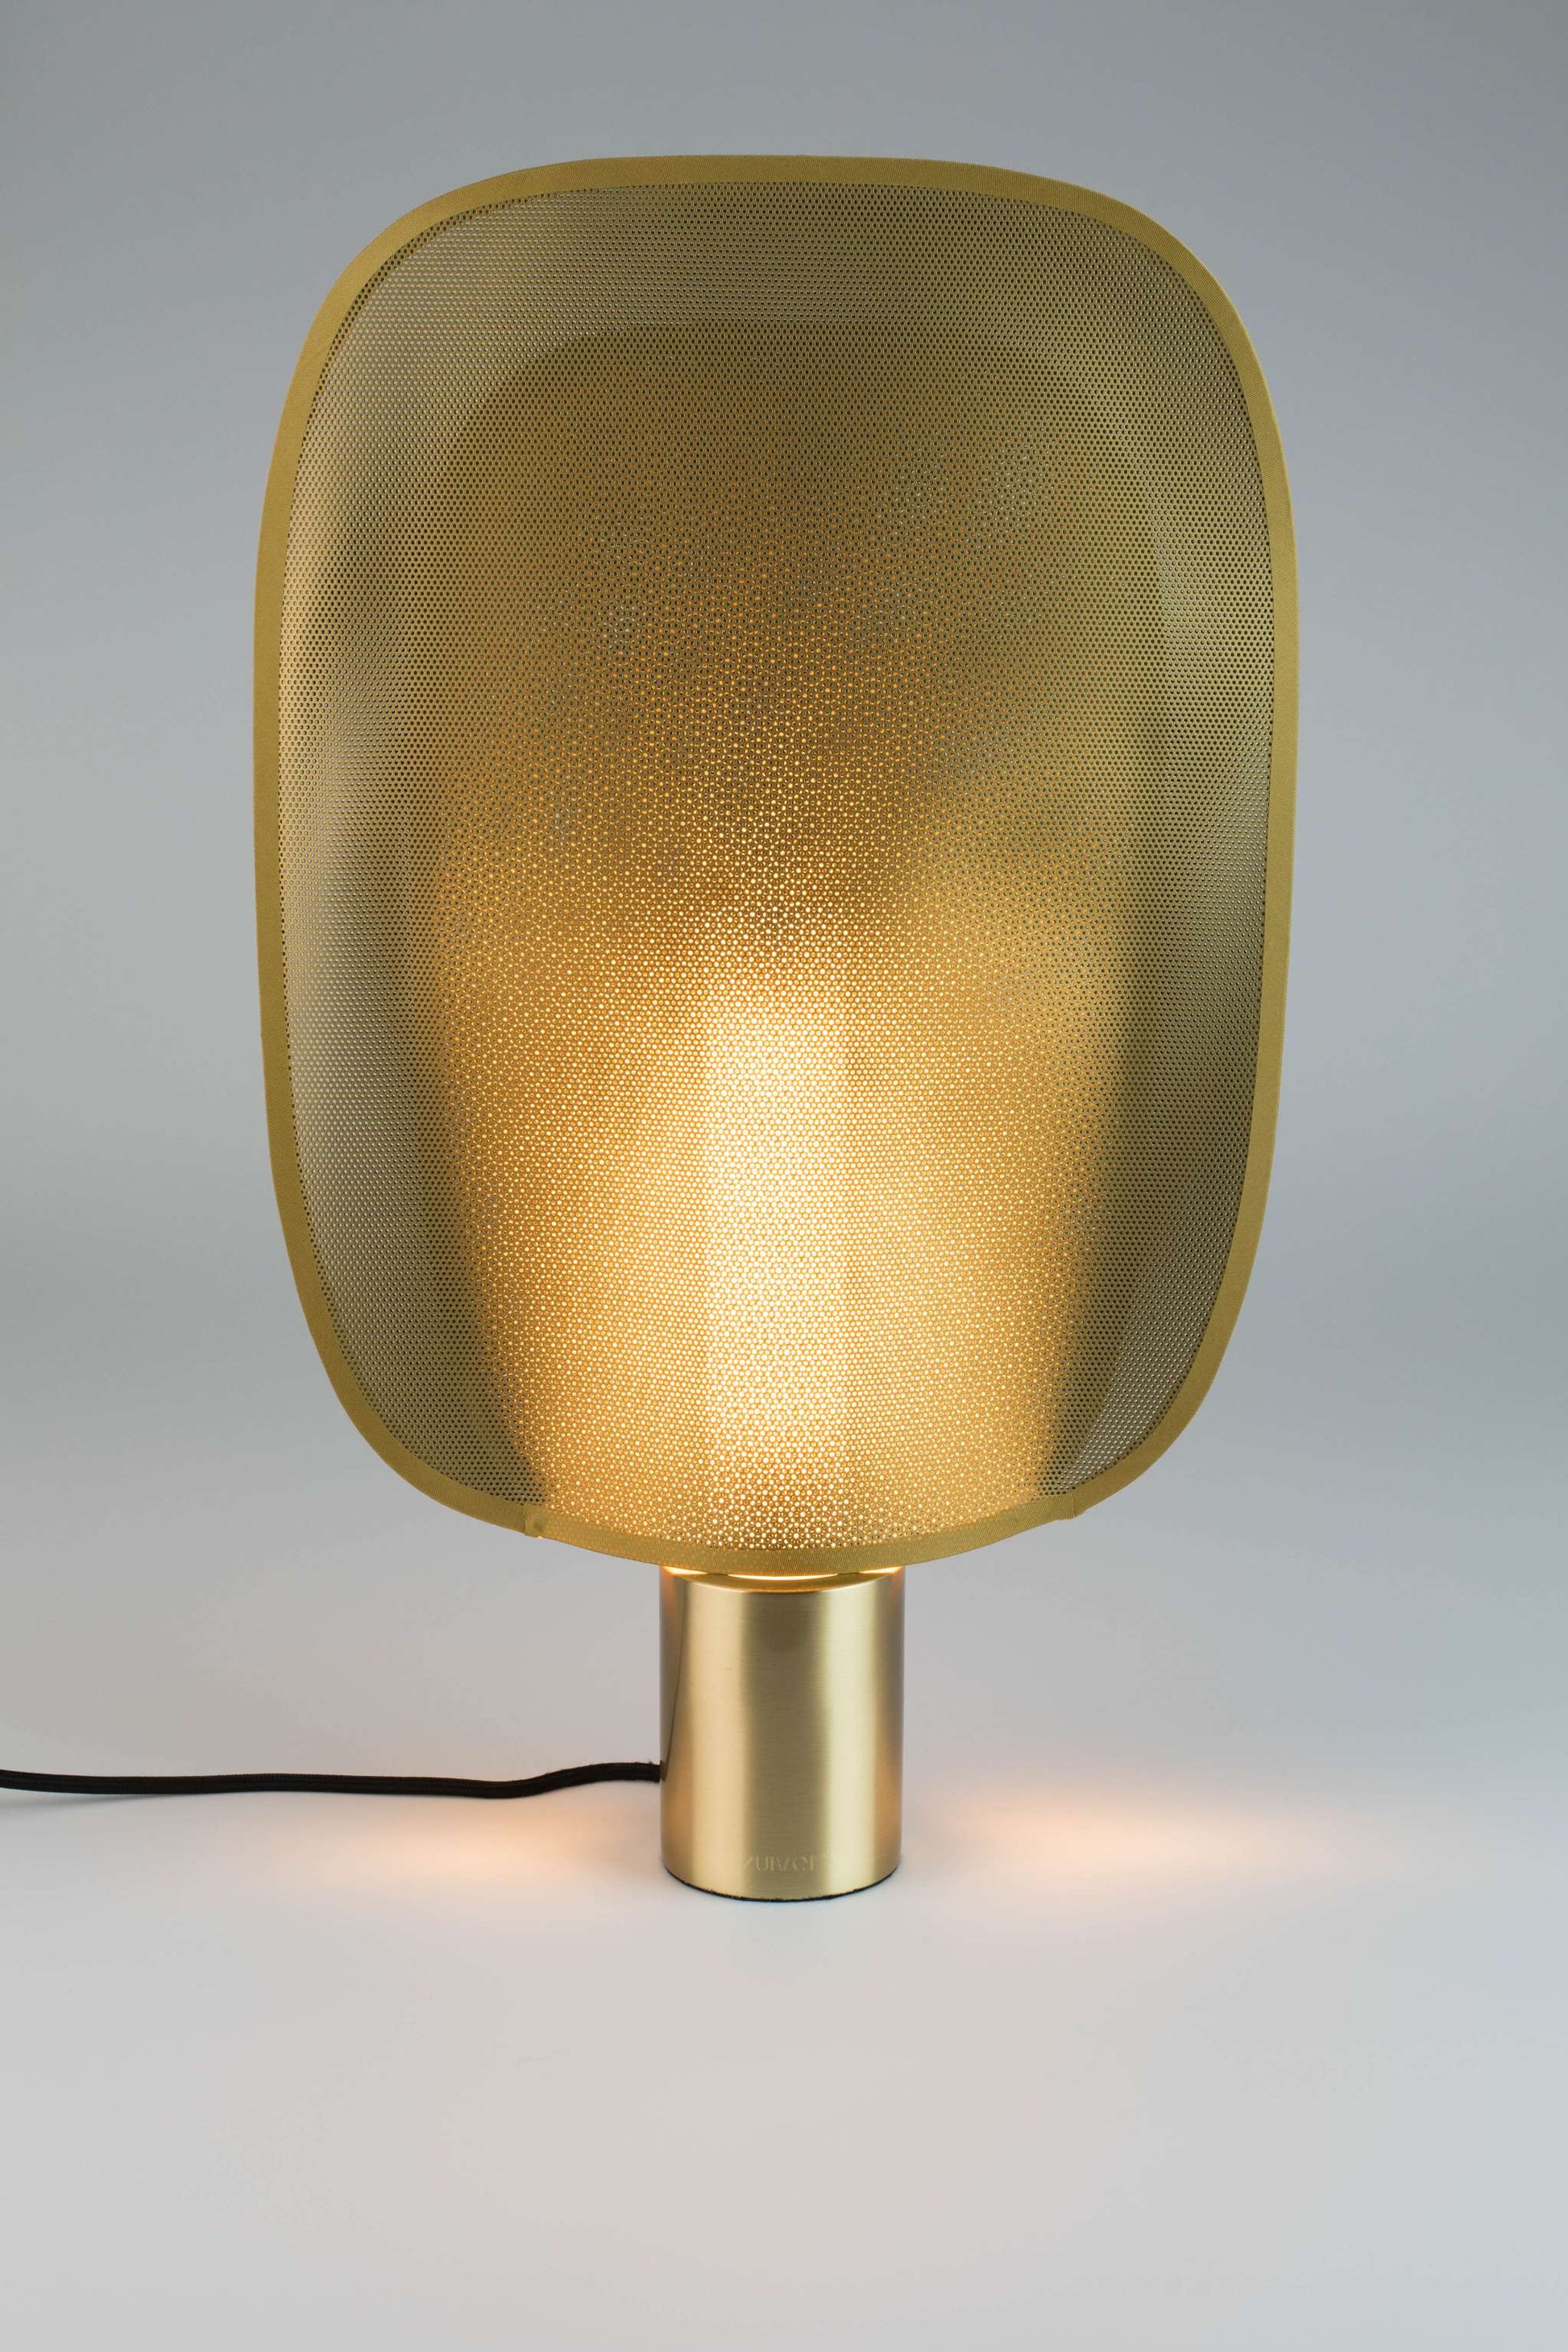 Zuiver | TABLE LAMP MAI M BRASS Default Title